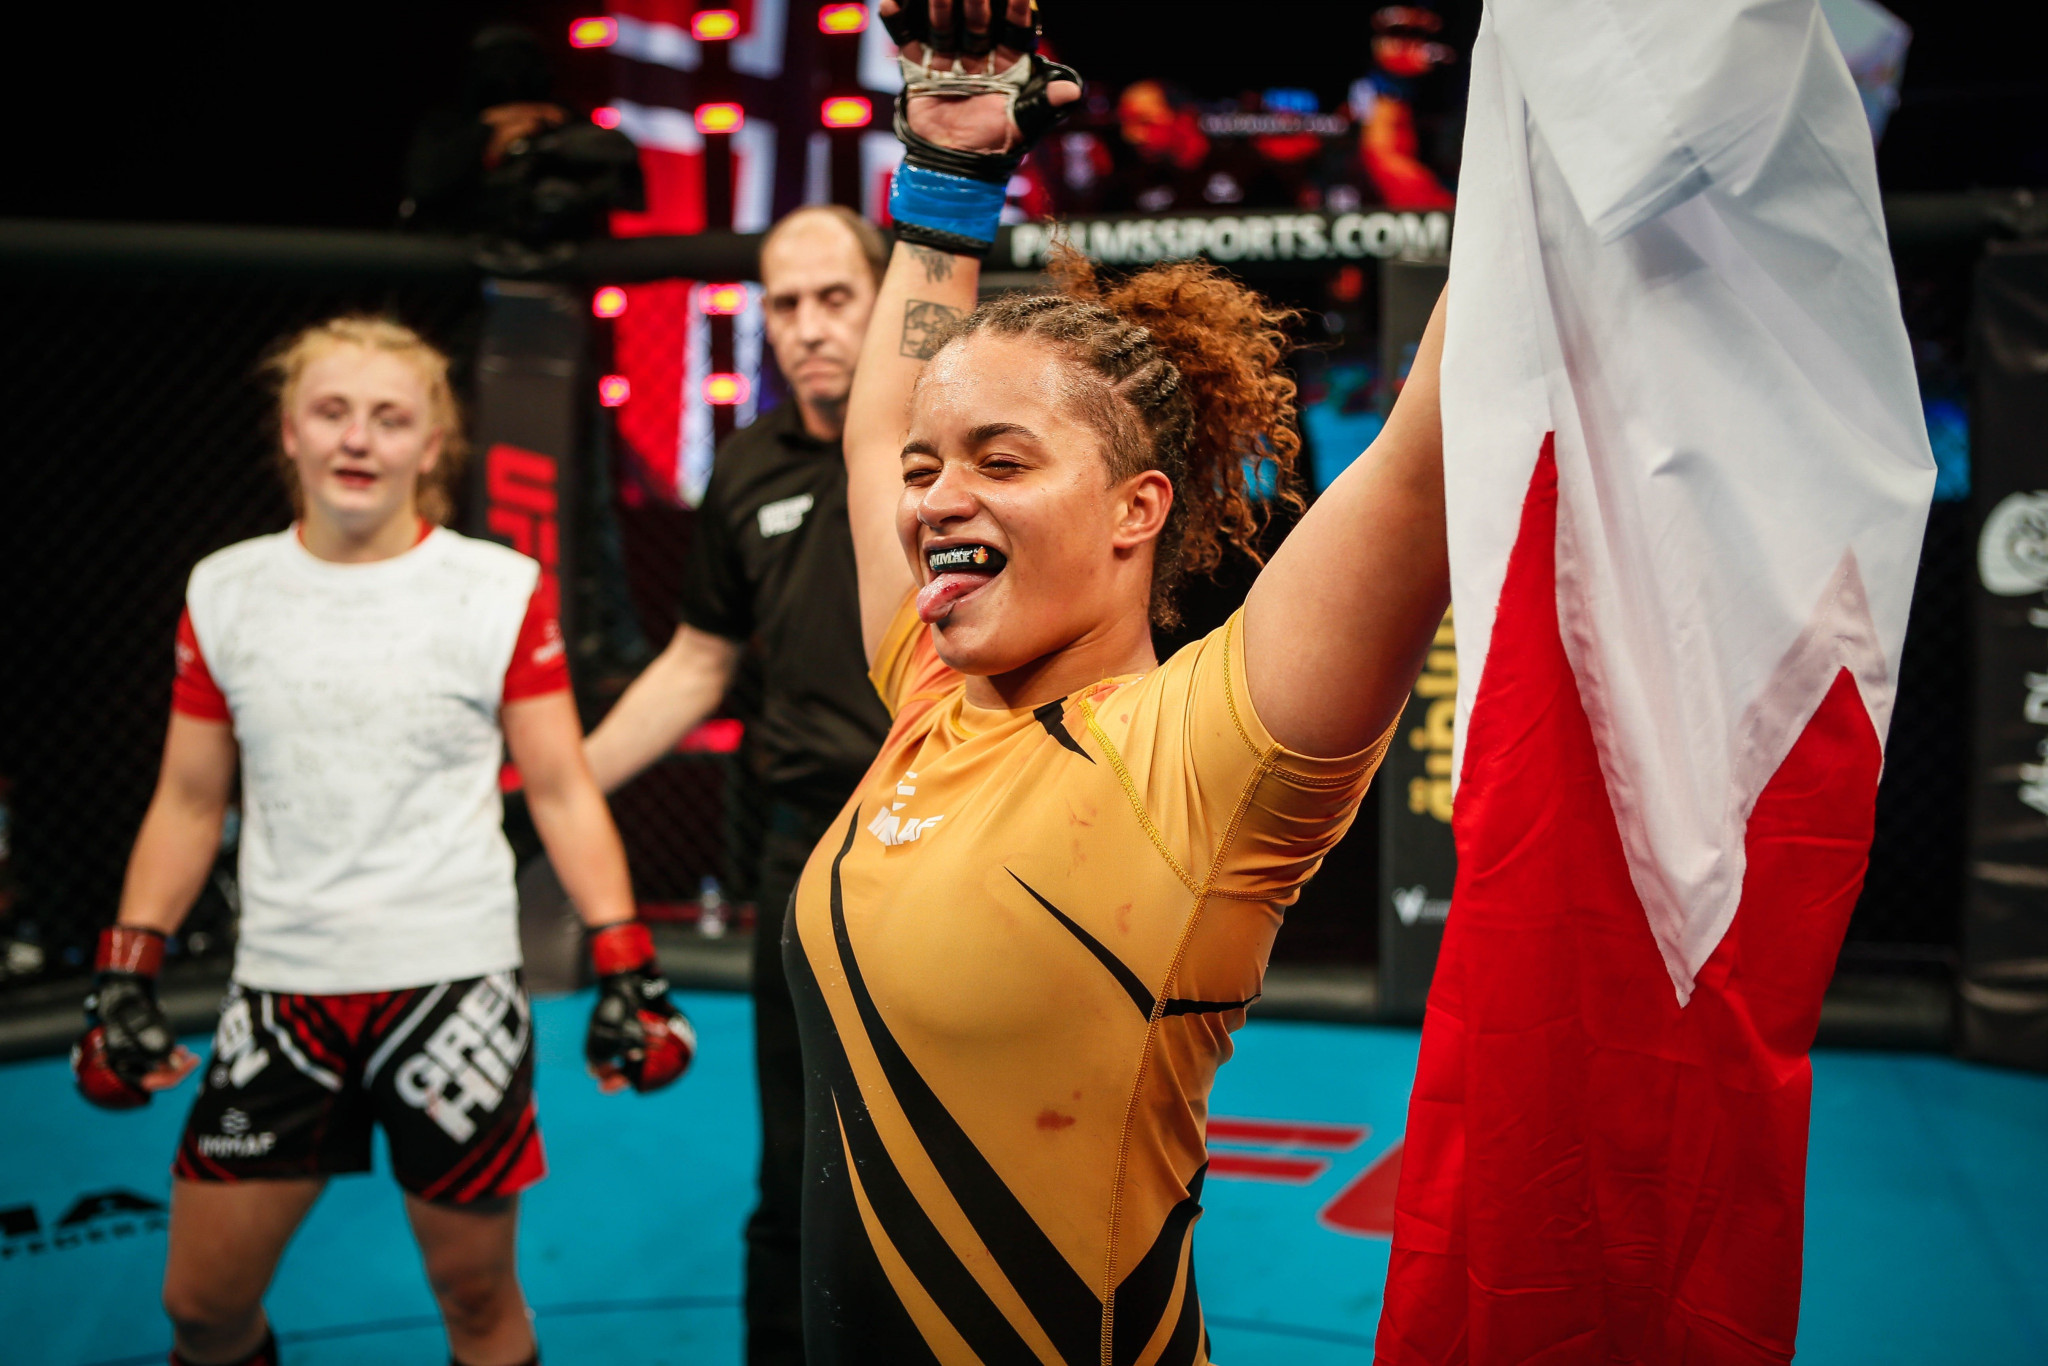 Sabrina Laurentina De Sousa defended her featherweight title for Bahrain ©IMMAF